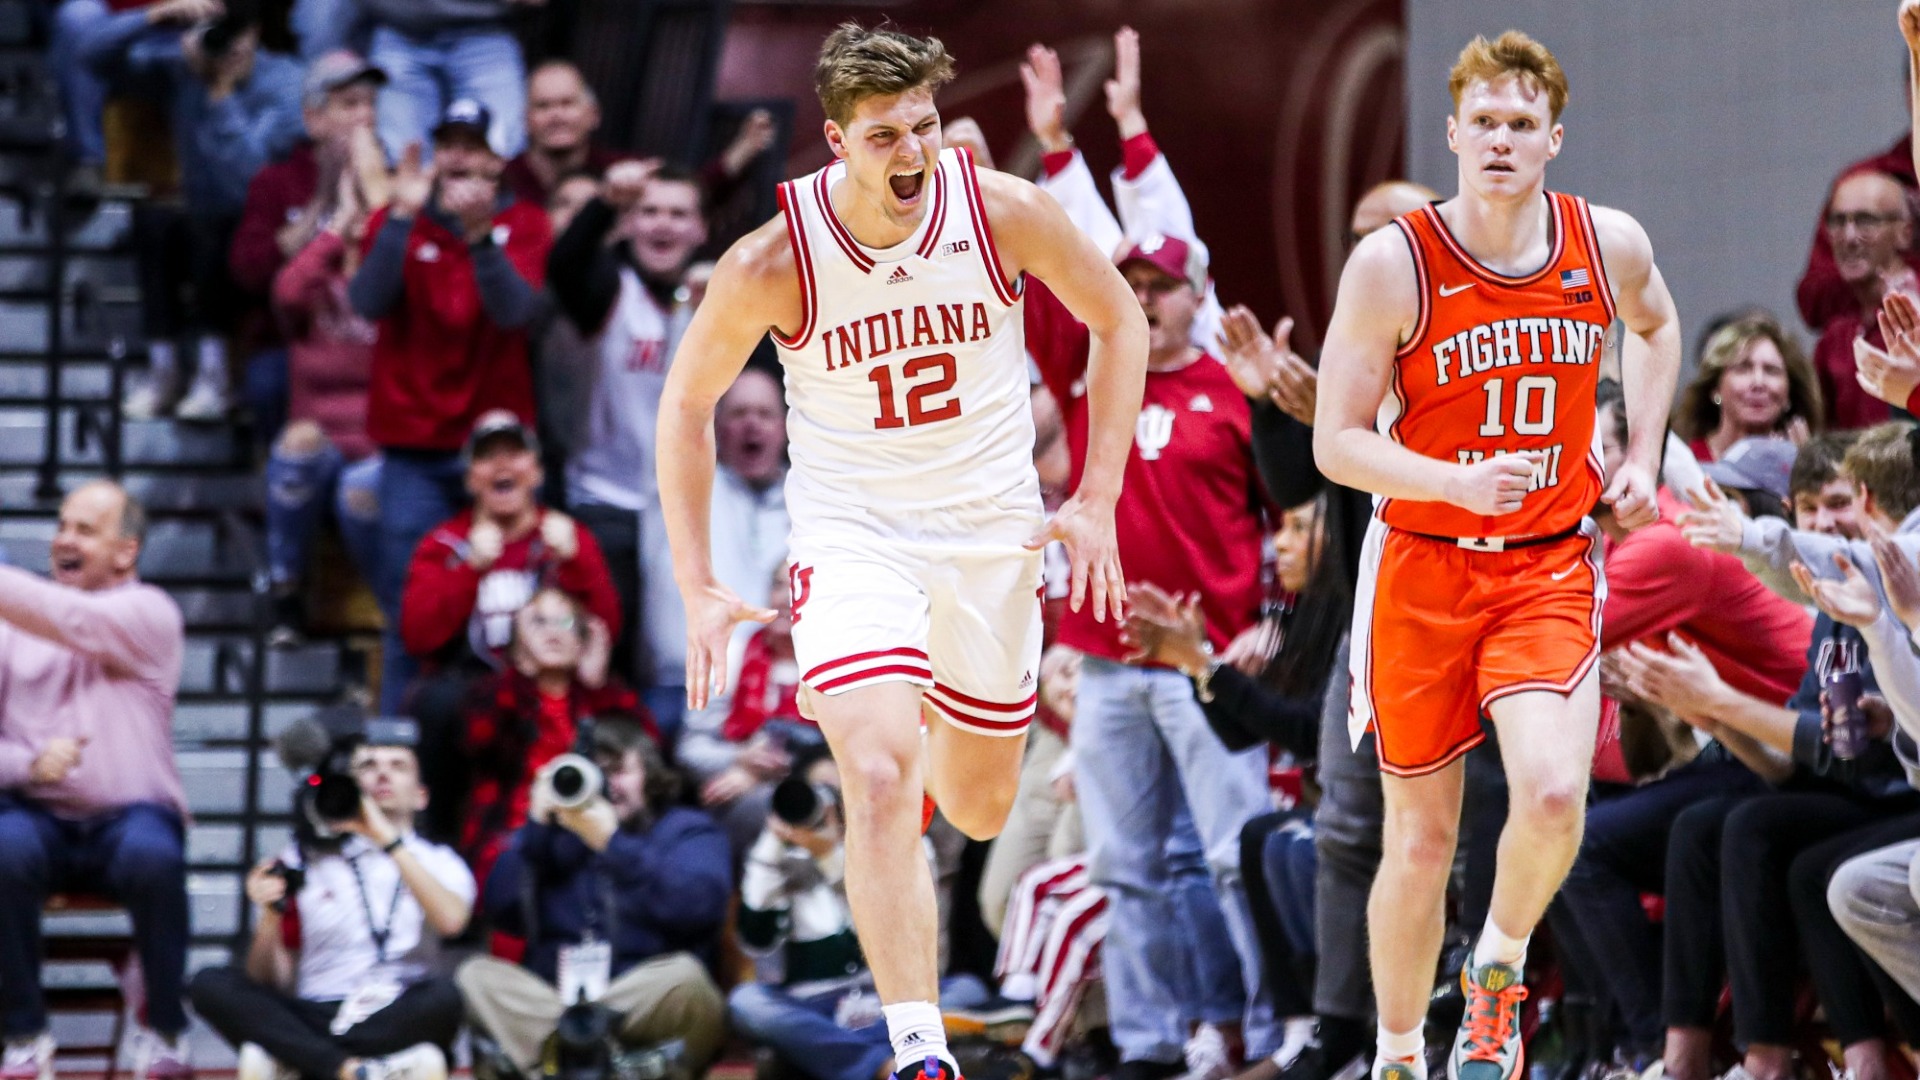 Hoosiers Take Close Contest over Fighting Illini 71-68